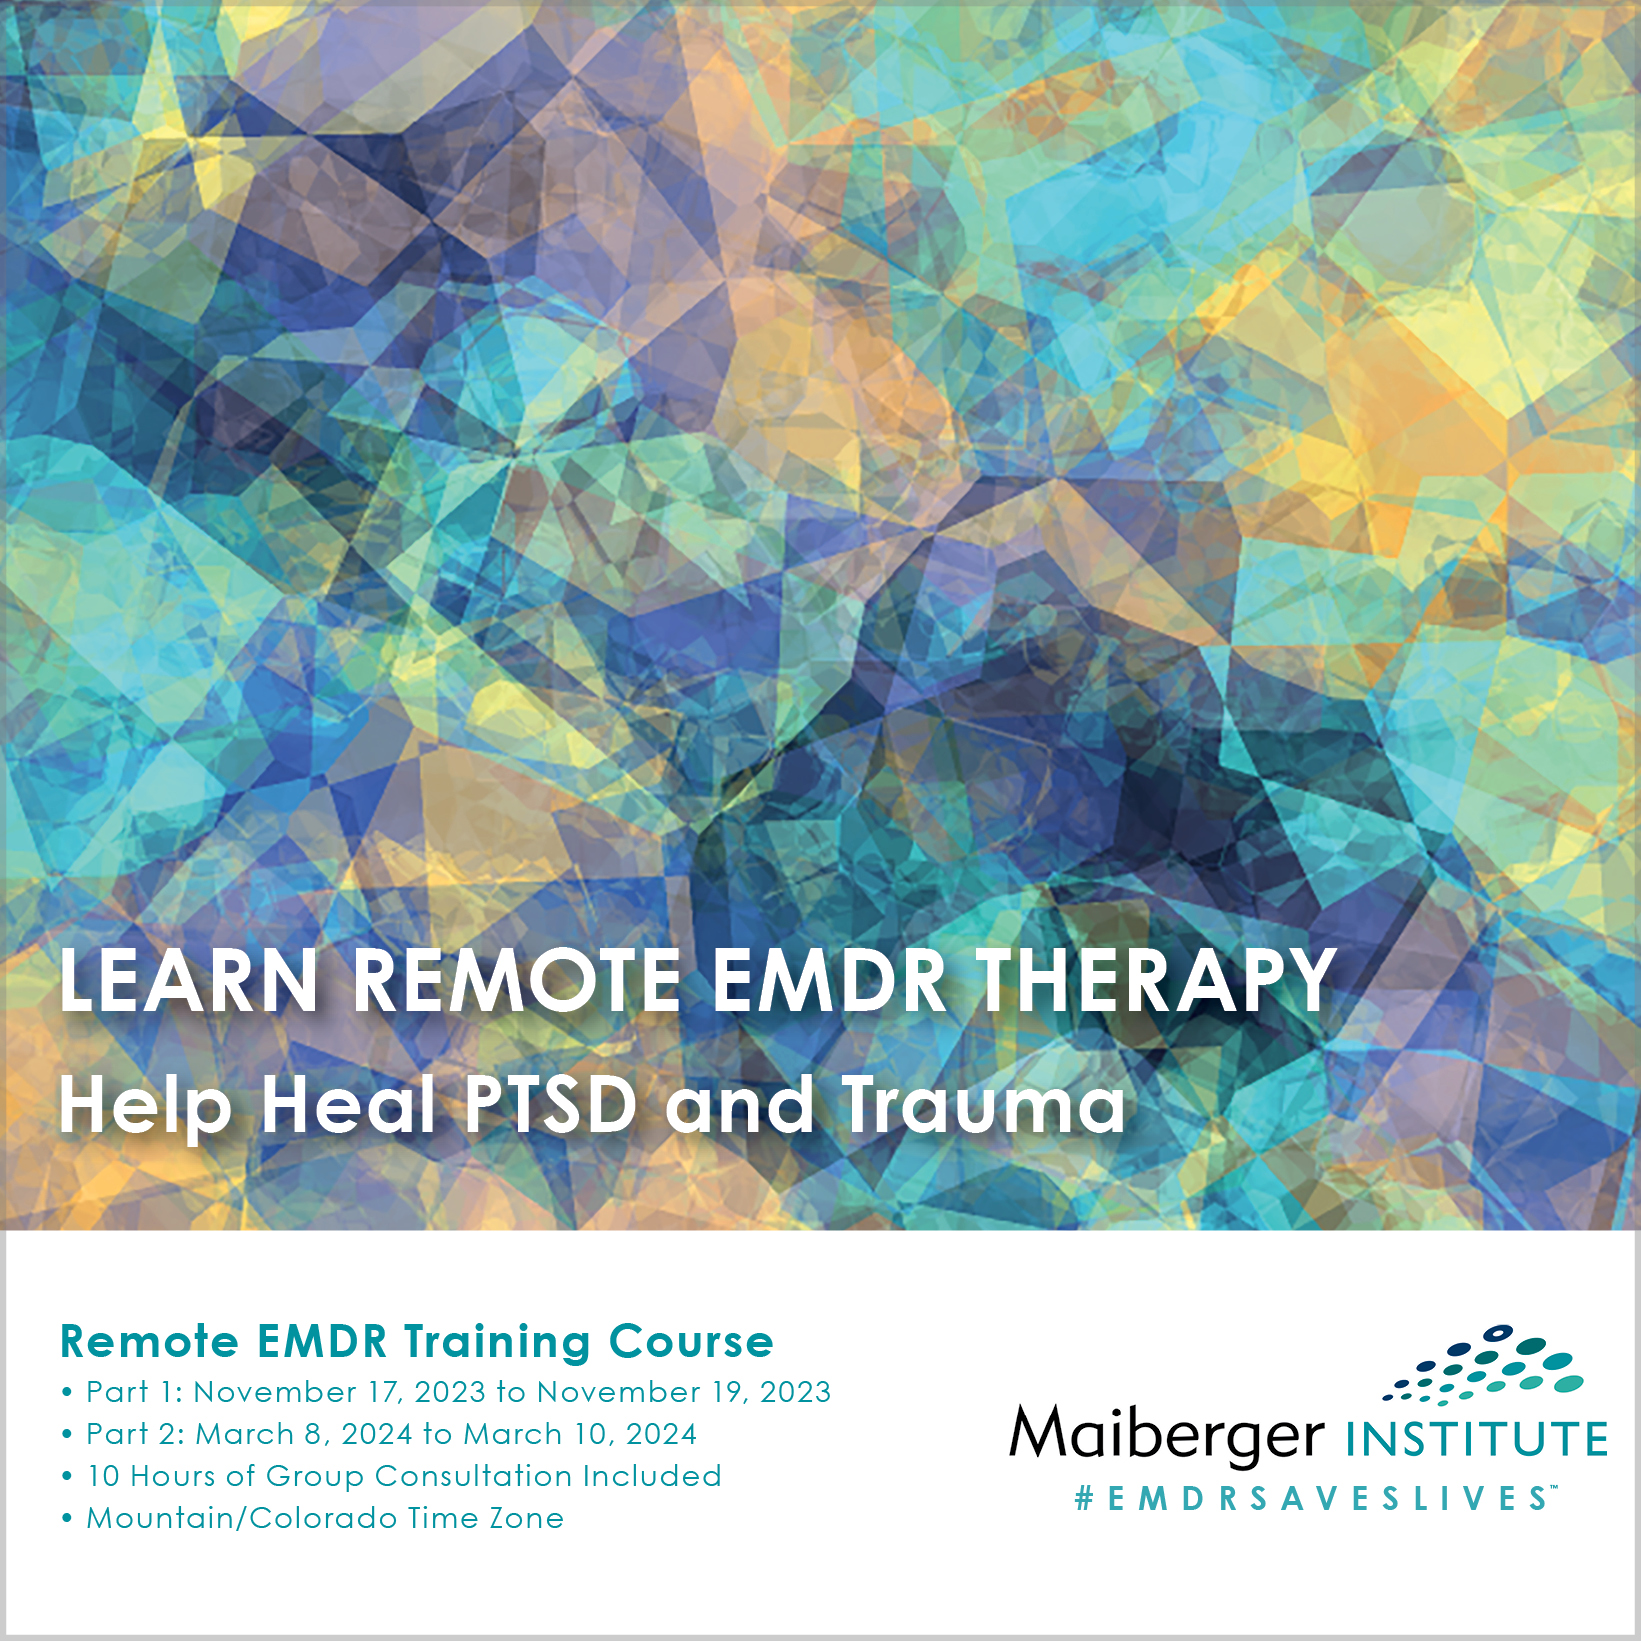 Complete Remote EMDR Training Course Part 1 November 17, 2023 to